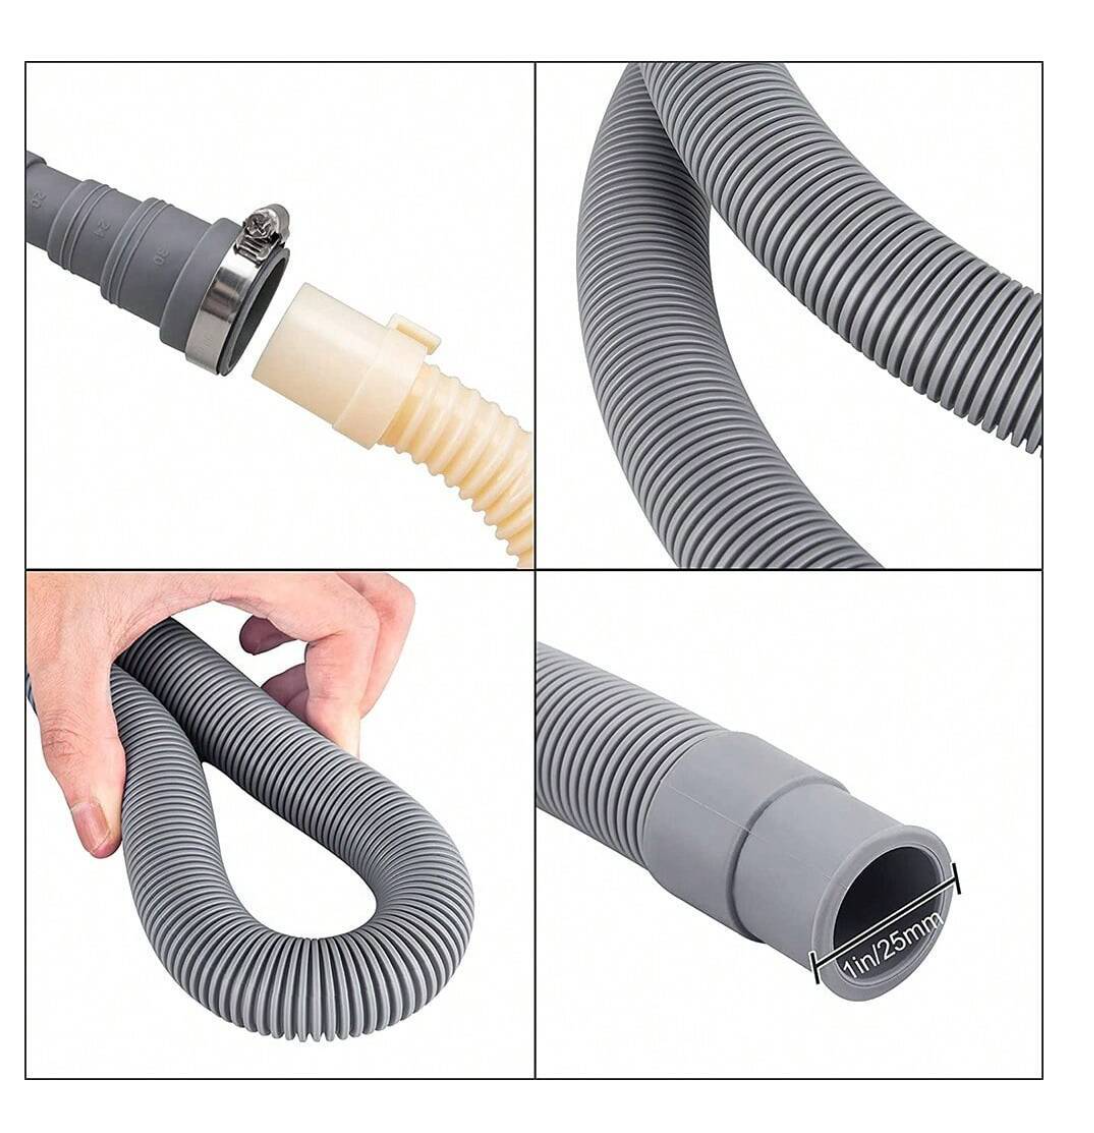 FlowGuard™: 6.5 Ft Universal Washing Machine Drain Hose – Your Corrugated & Flexible Solution with Secure Clamp!